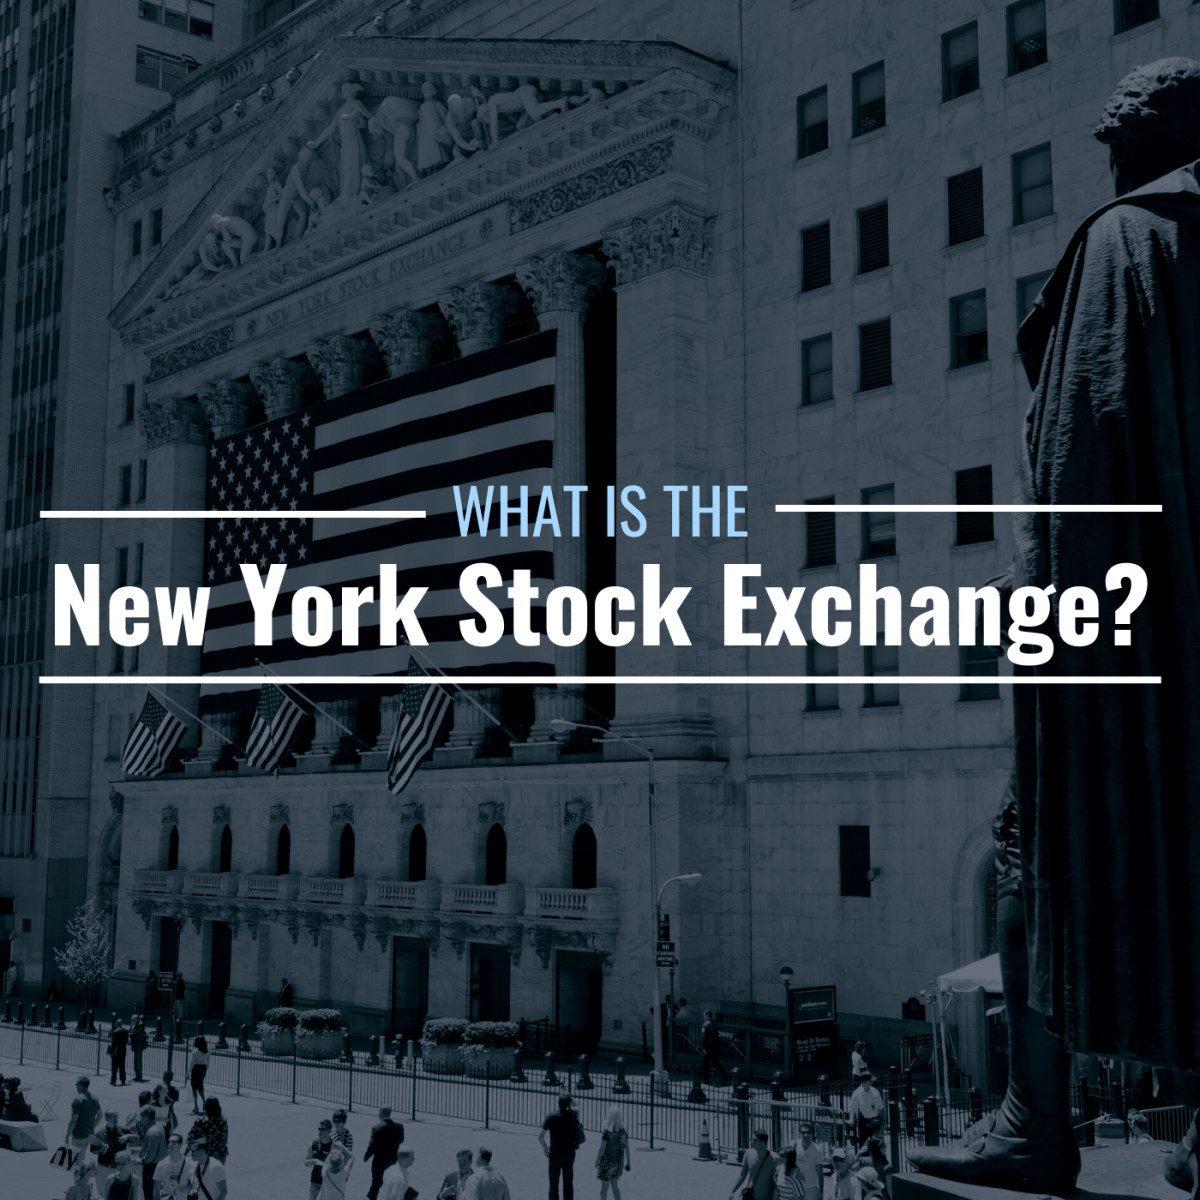 The New York Stock Exchange is located on Wall Street in New York City.